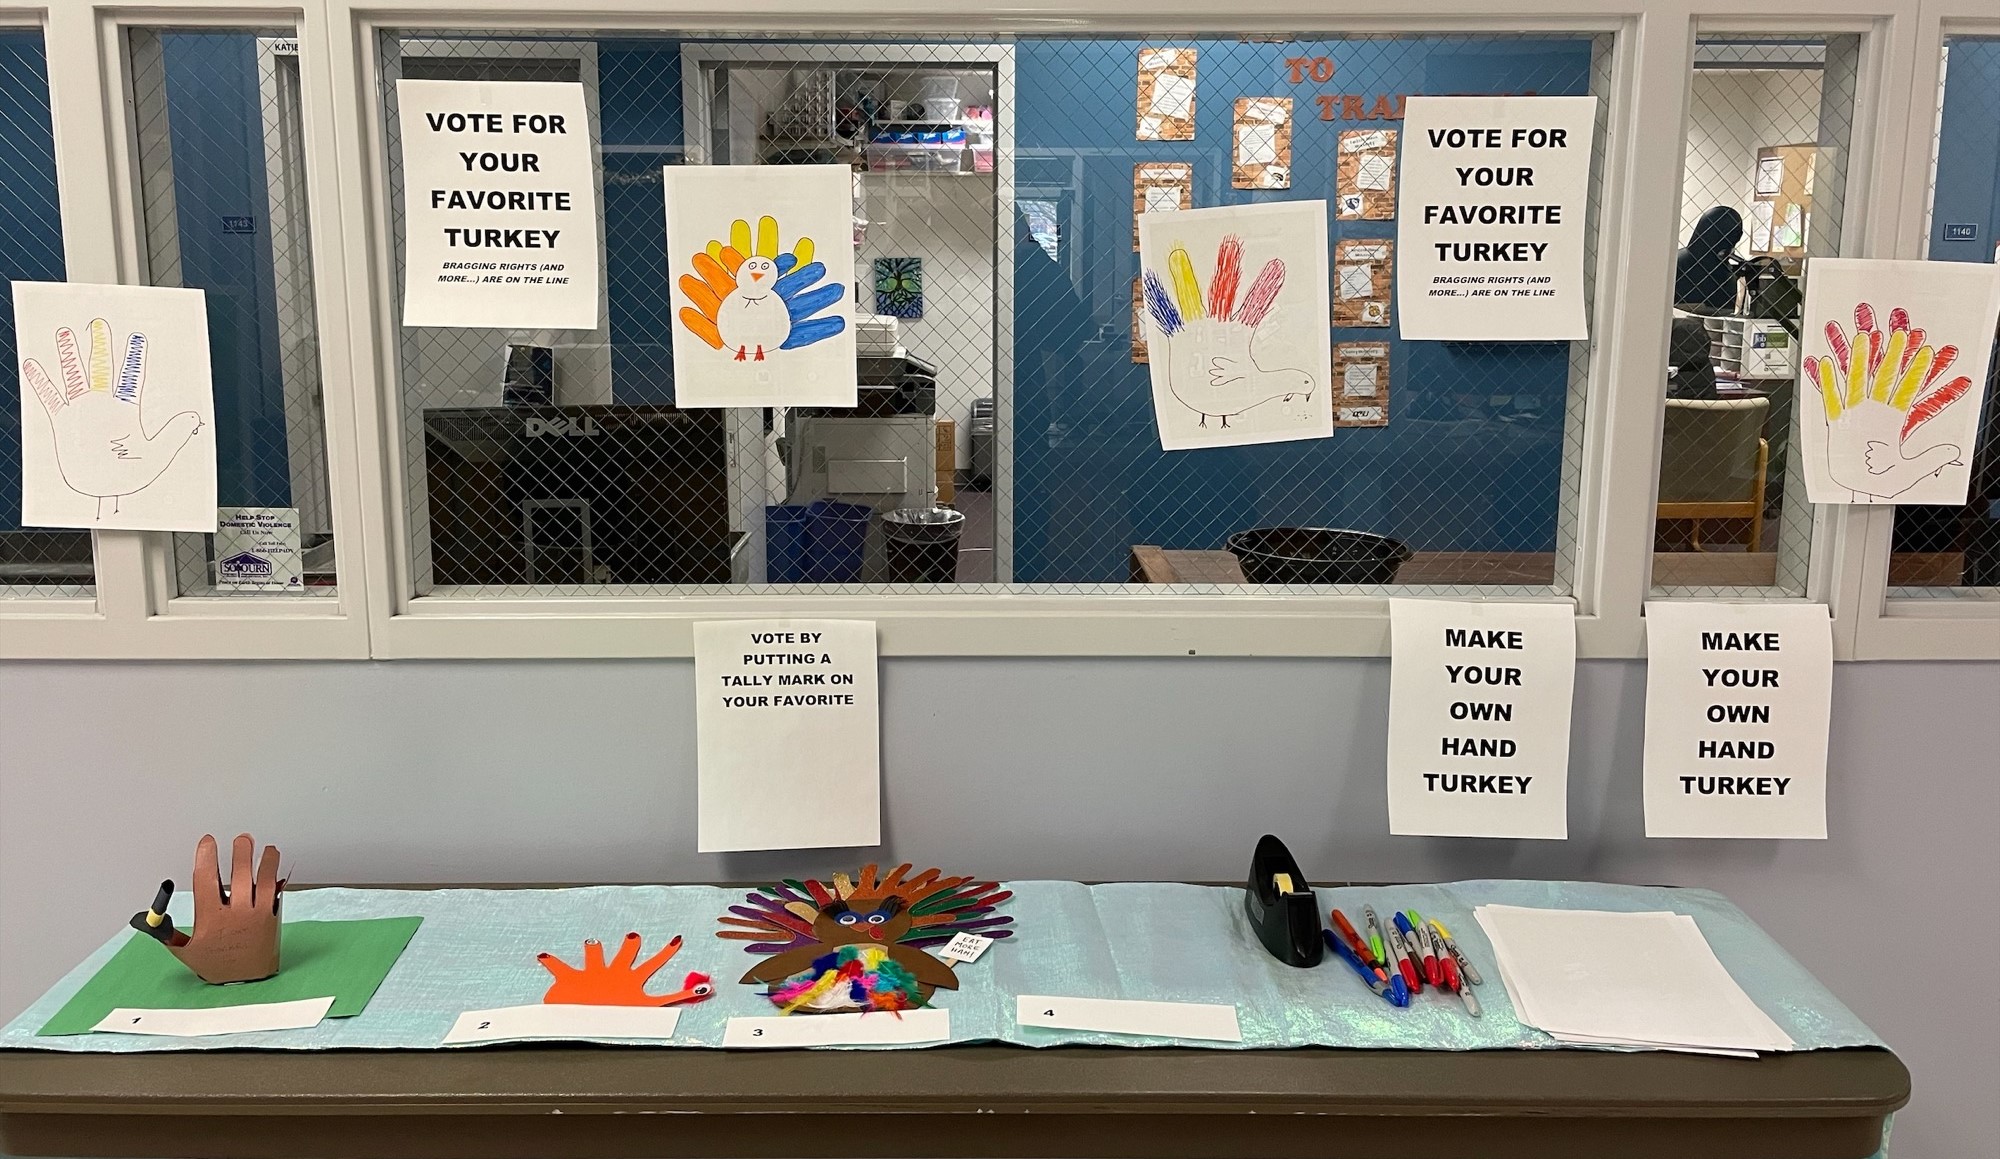 Four hand turkeys to vote on: 1) 3D with pilgrim hat, 2) orange, 3) multi-feathered and multi-colored holding a sign and 4) no turkey. Signs up to make your own hand turkey to decorate the area.